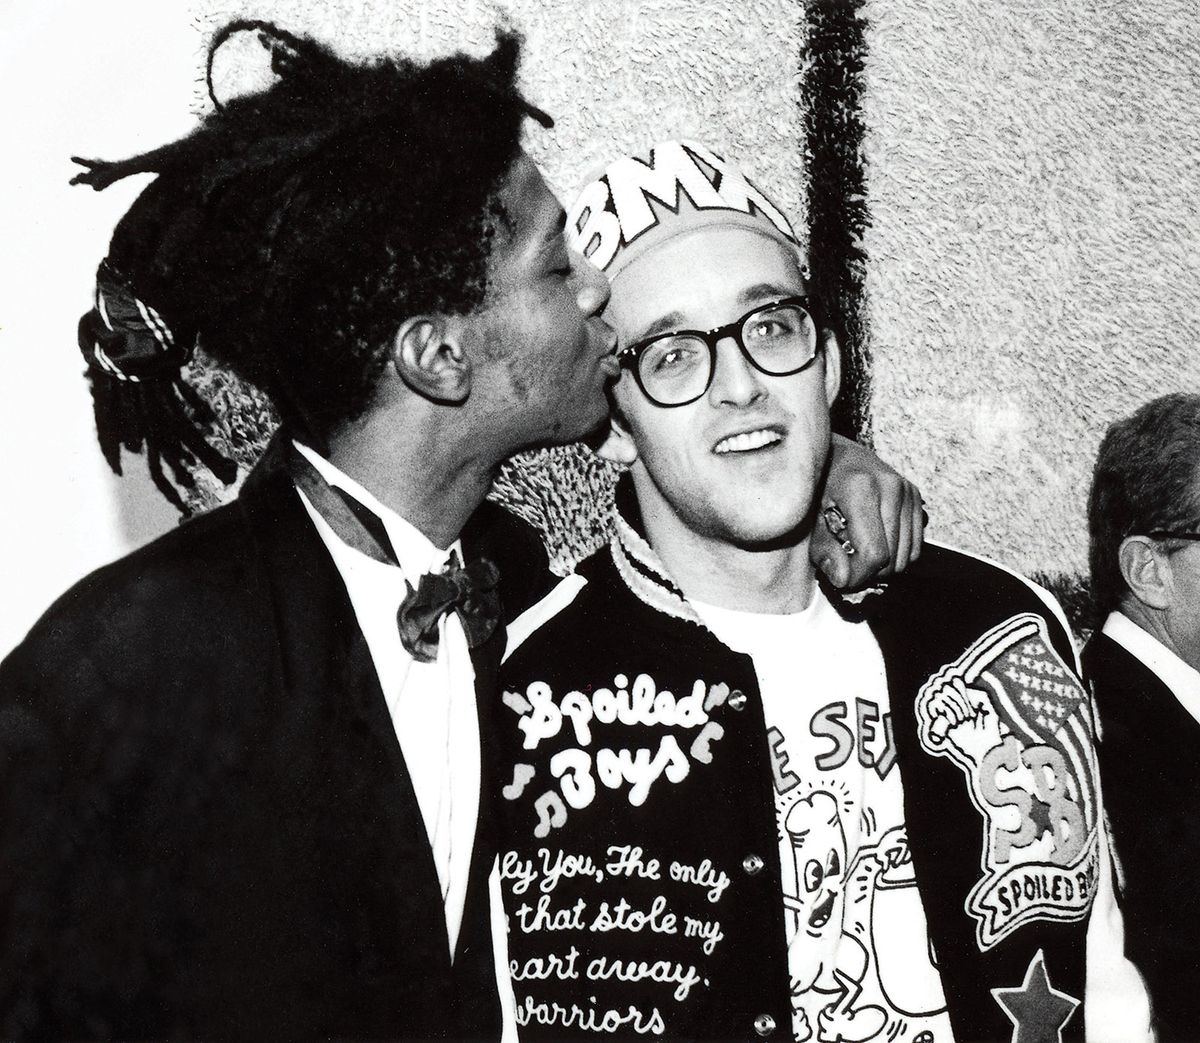 Keith Haring and Jean-Michel Basquiat in 1987 © George Hirose